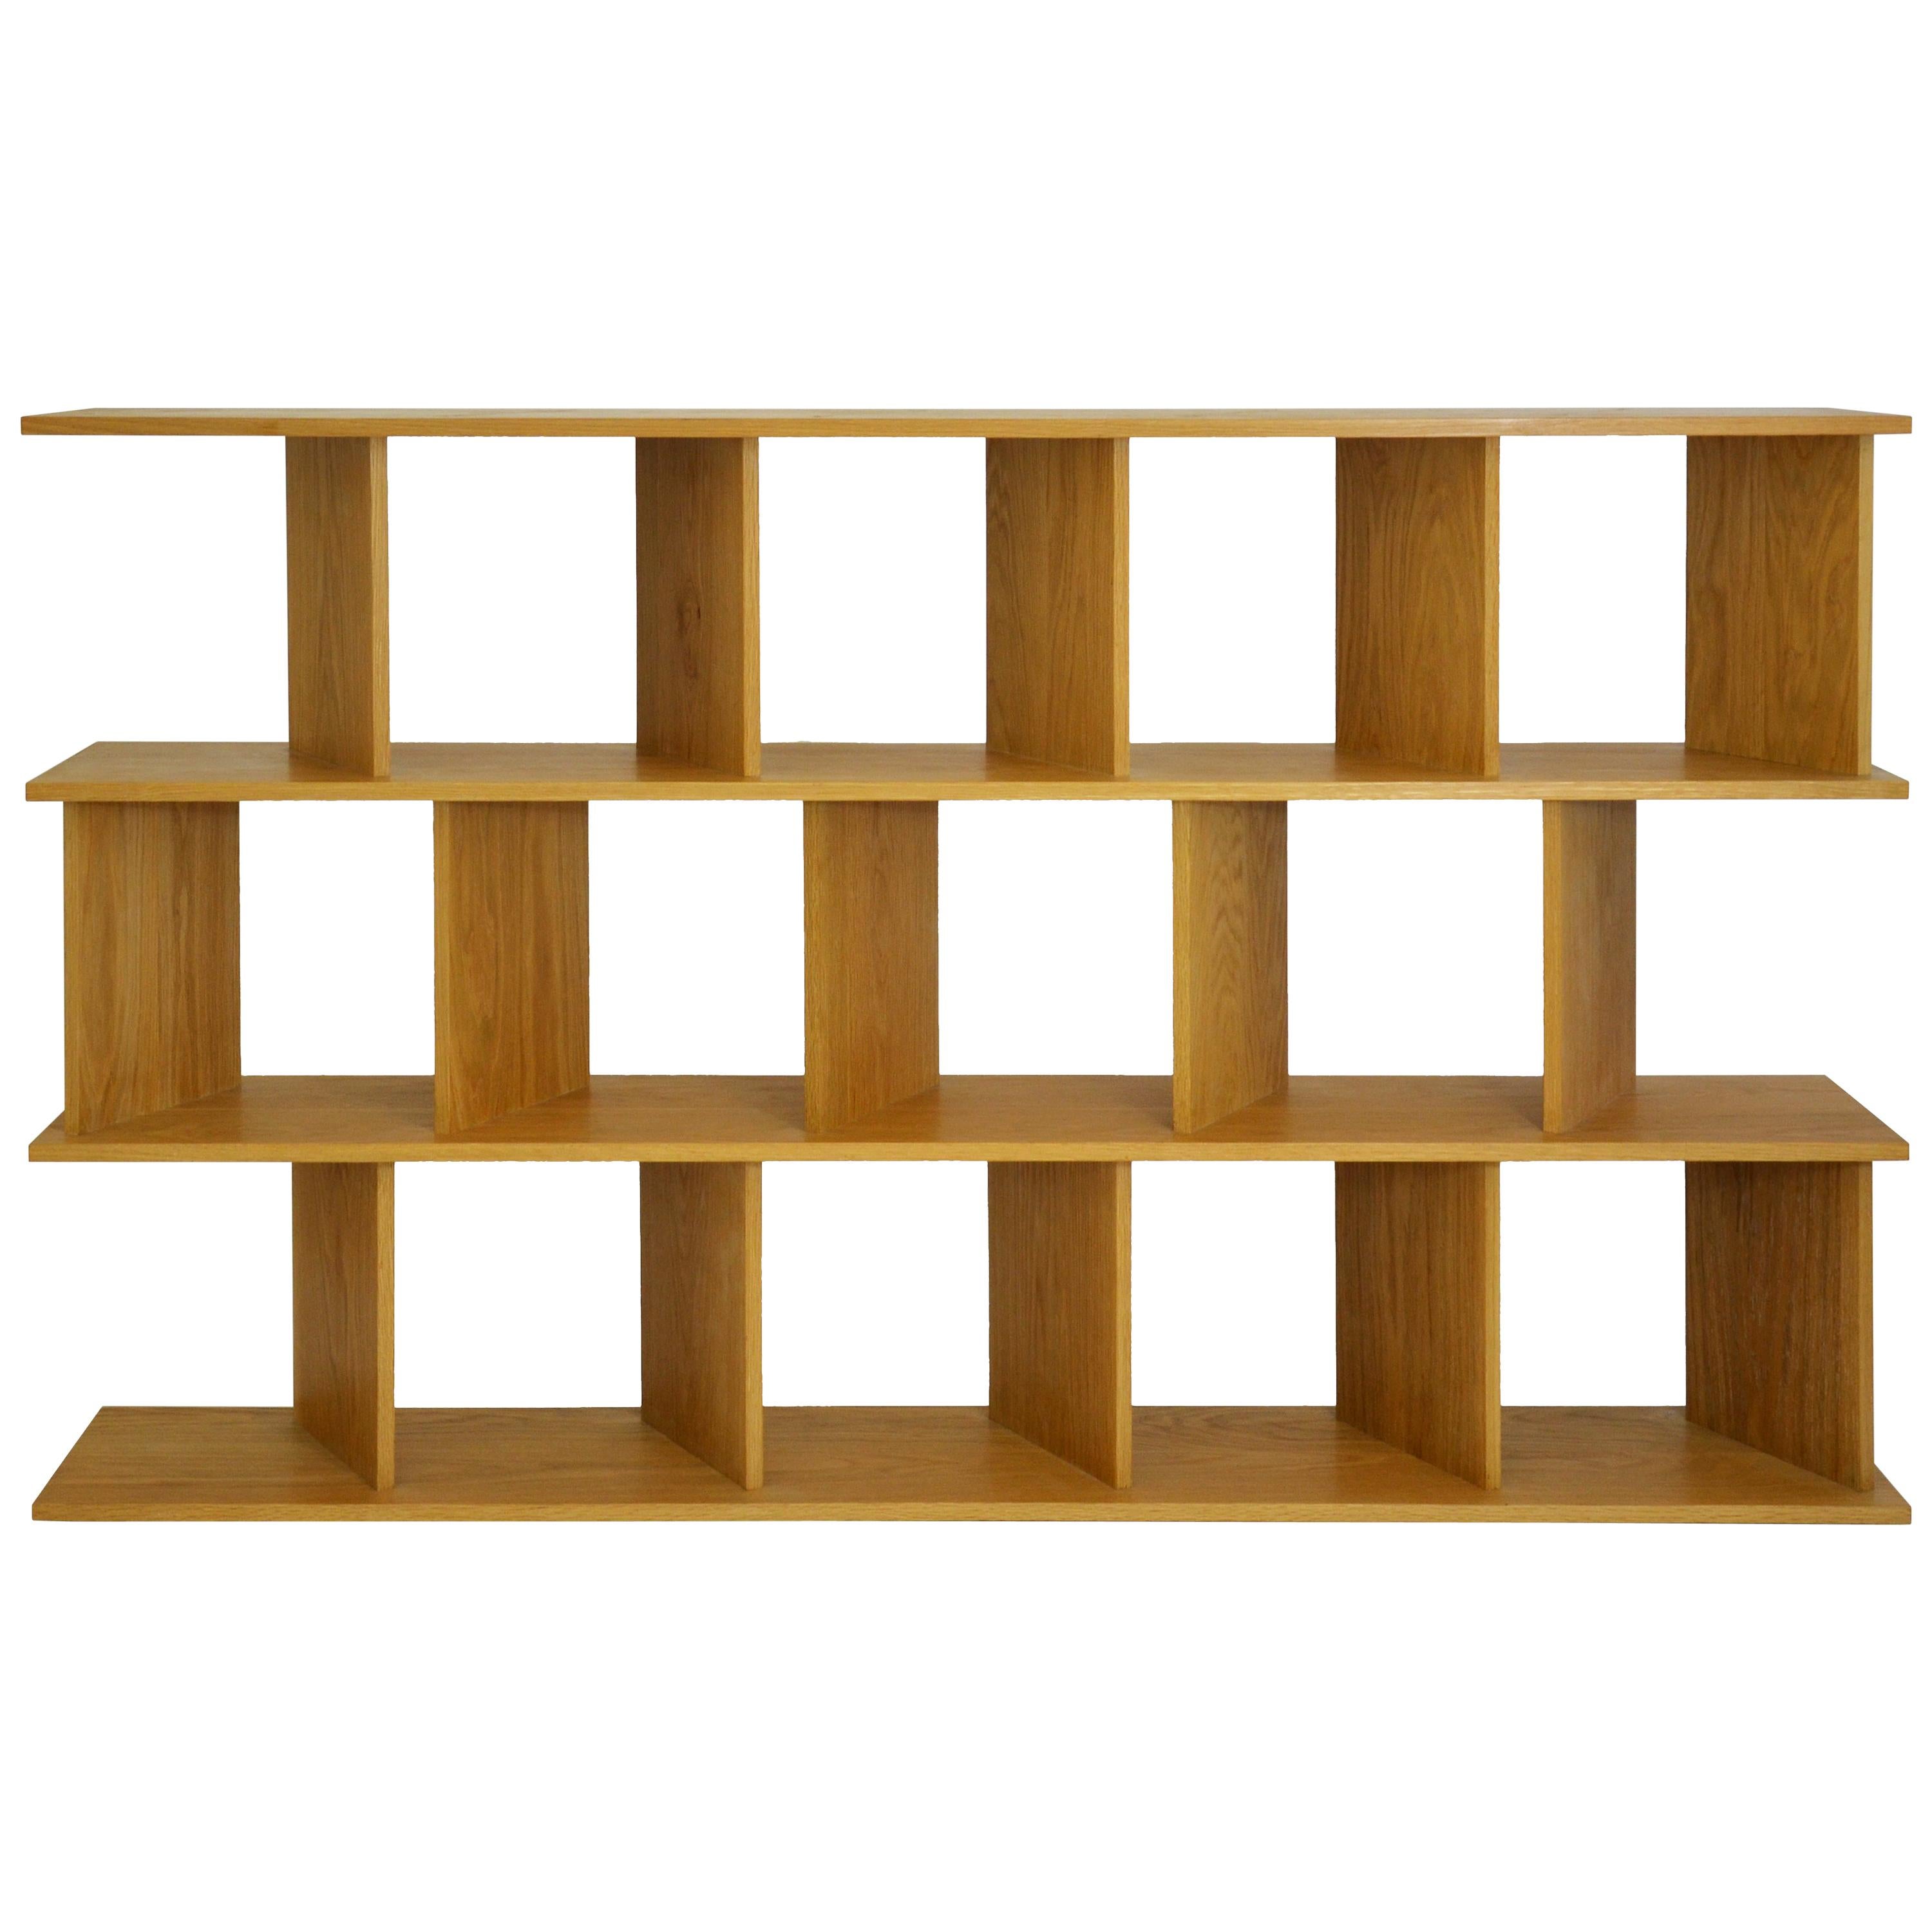 Contemporary Room Divider Shelving "30/30 M" in Oak by Casey Lurie Studio